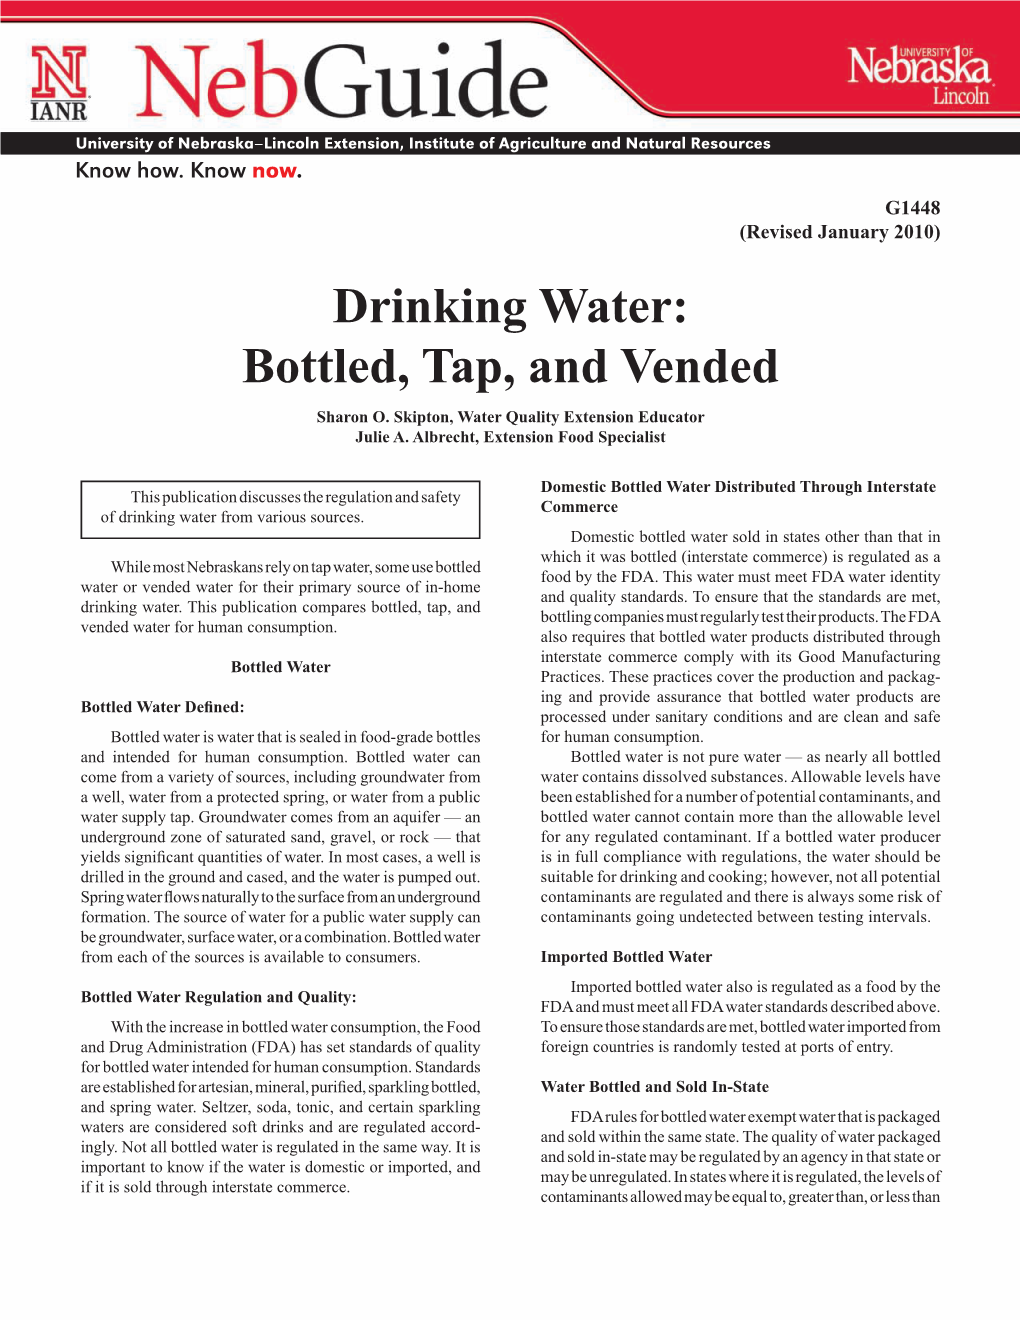 Drinking Water: Bottled, Tap, and Vended Sharon O